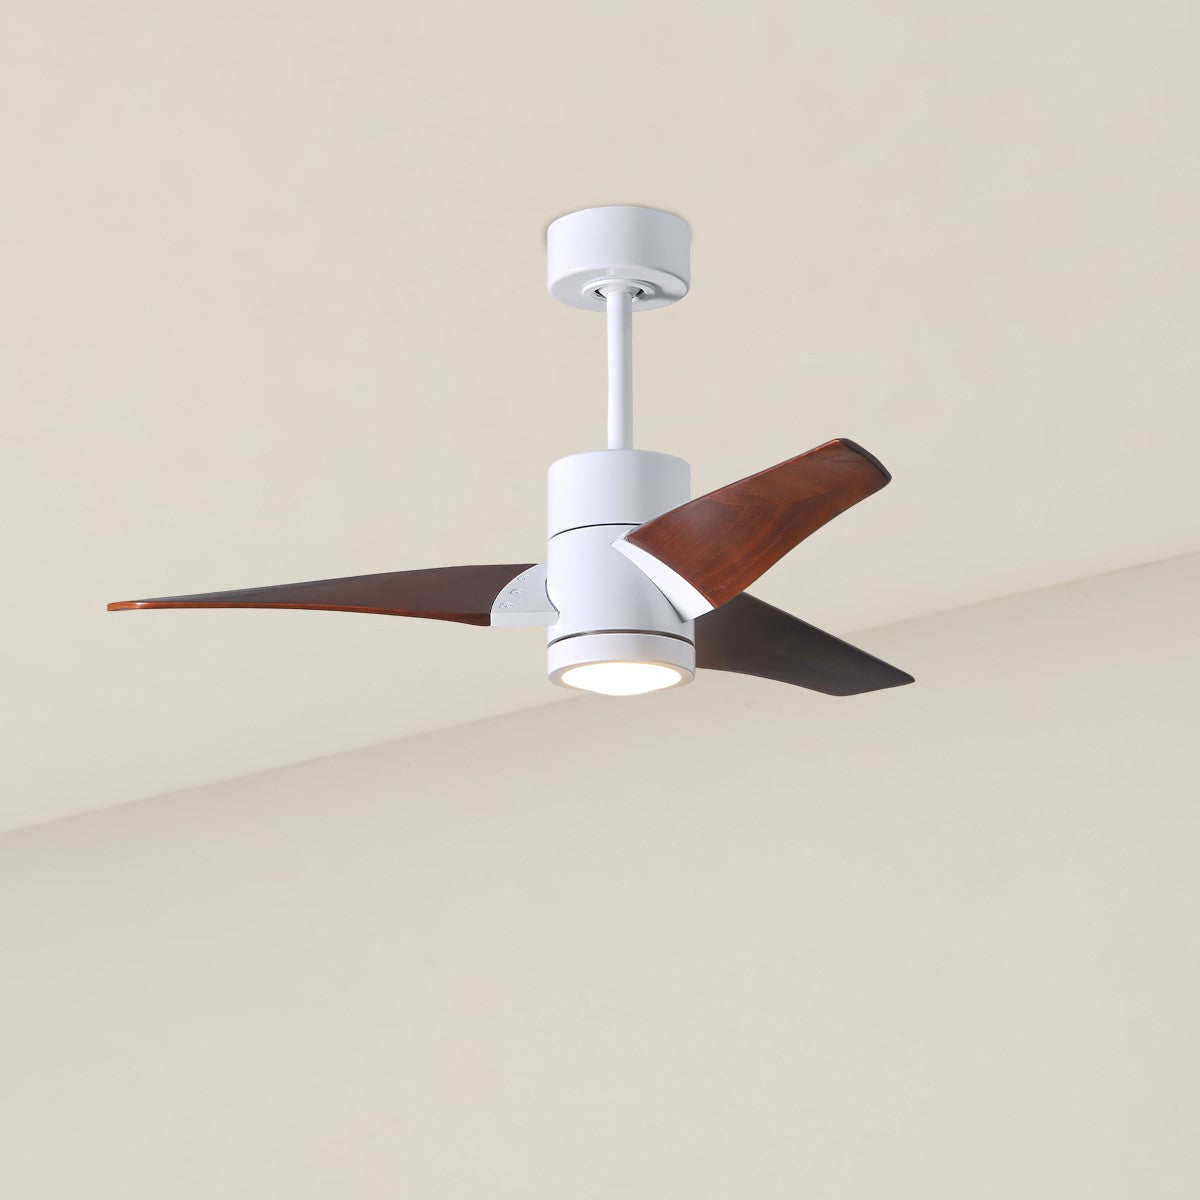 Super Janet 42 Inch Outdoor Ceiling Fan With Light, Wall And Remote Control Included